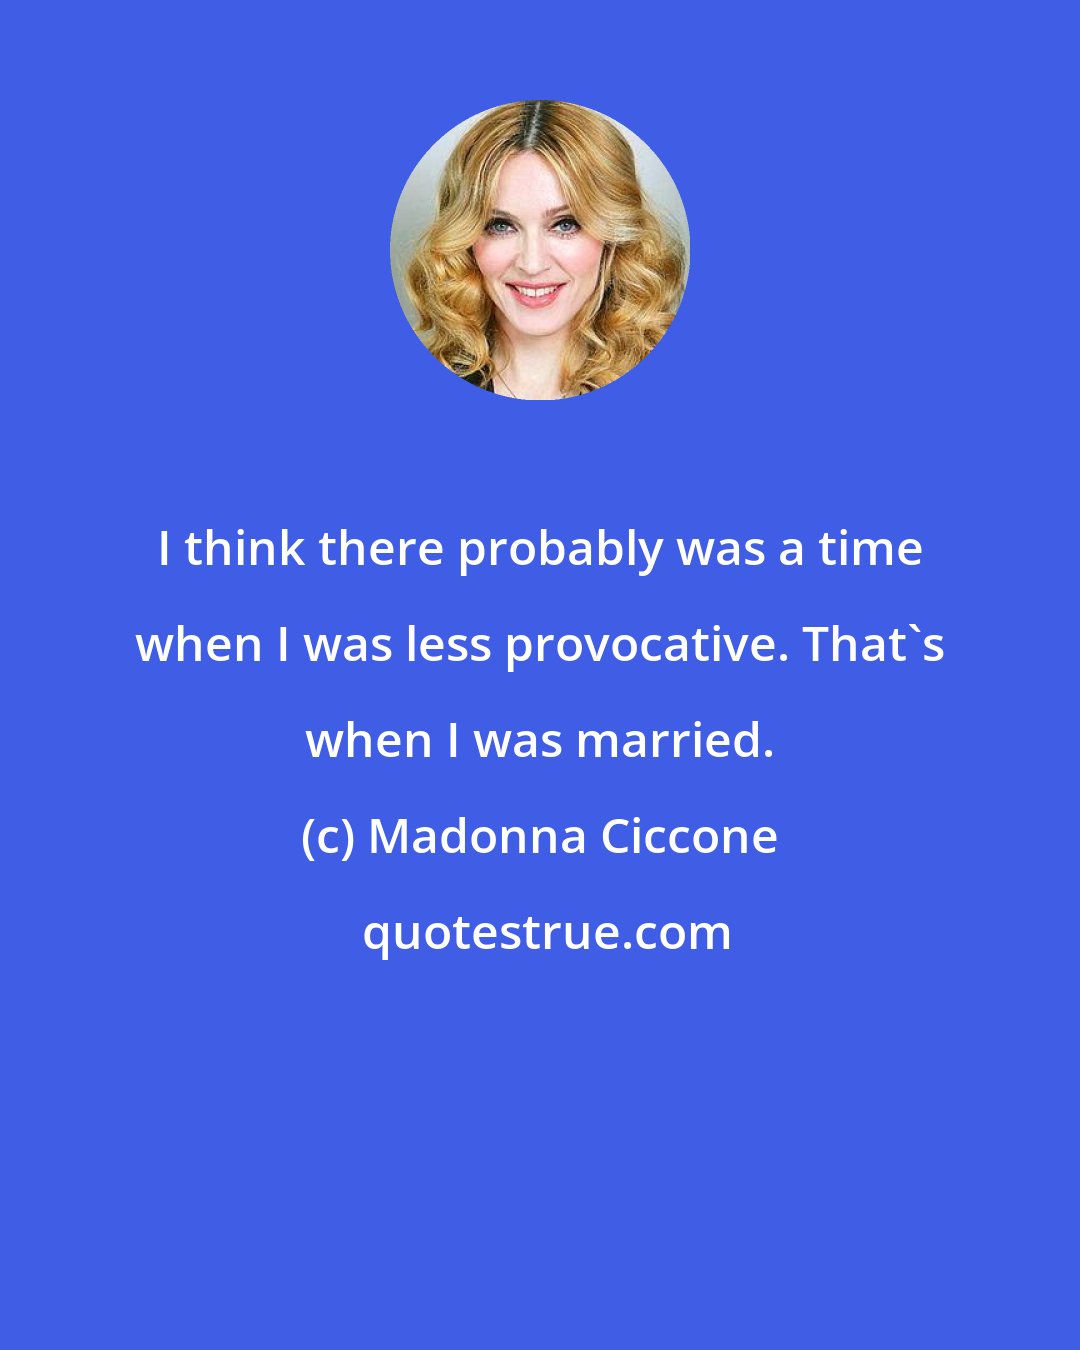 Madonna Ciccone: I think there probably was a time when I was less provocative. That's when I was married.